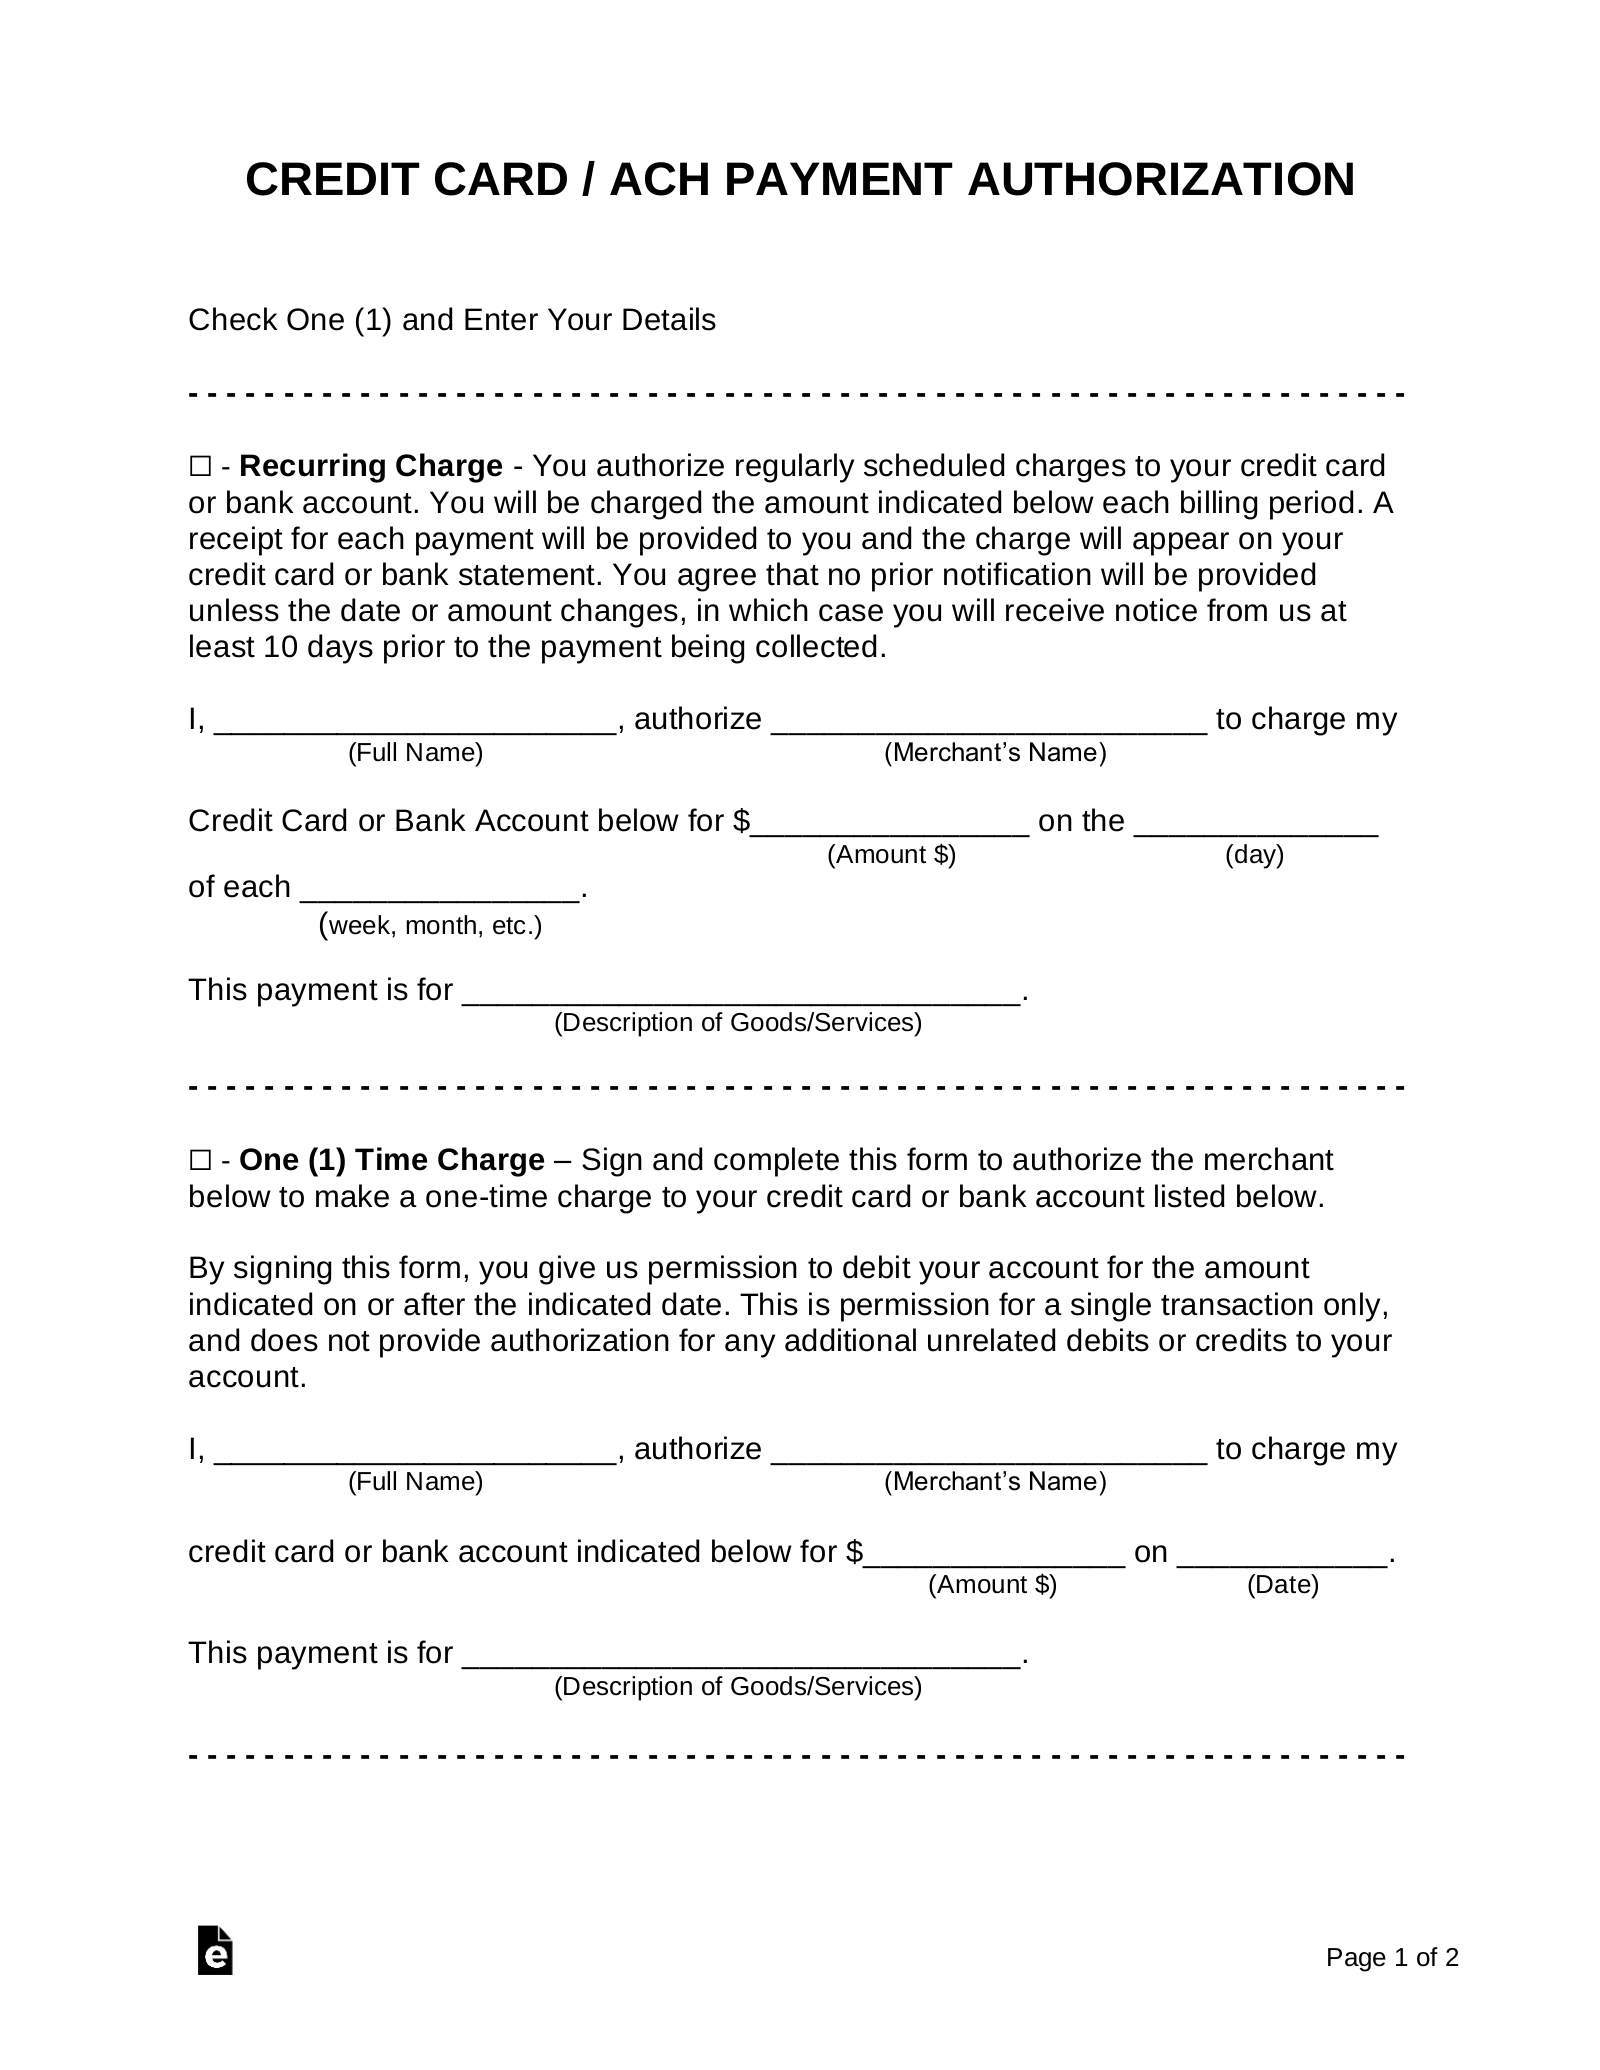 Free Credit Card (Ach) Authorization Forms – Pdf | Word Within Credit Card Authorization Form Template Word